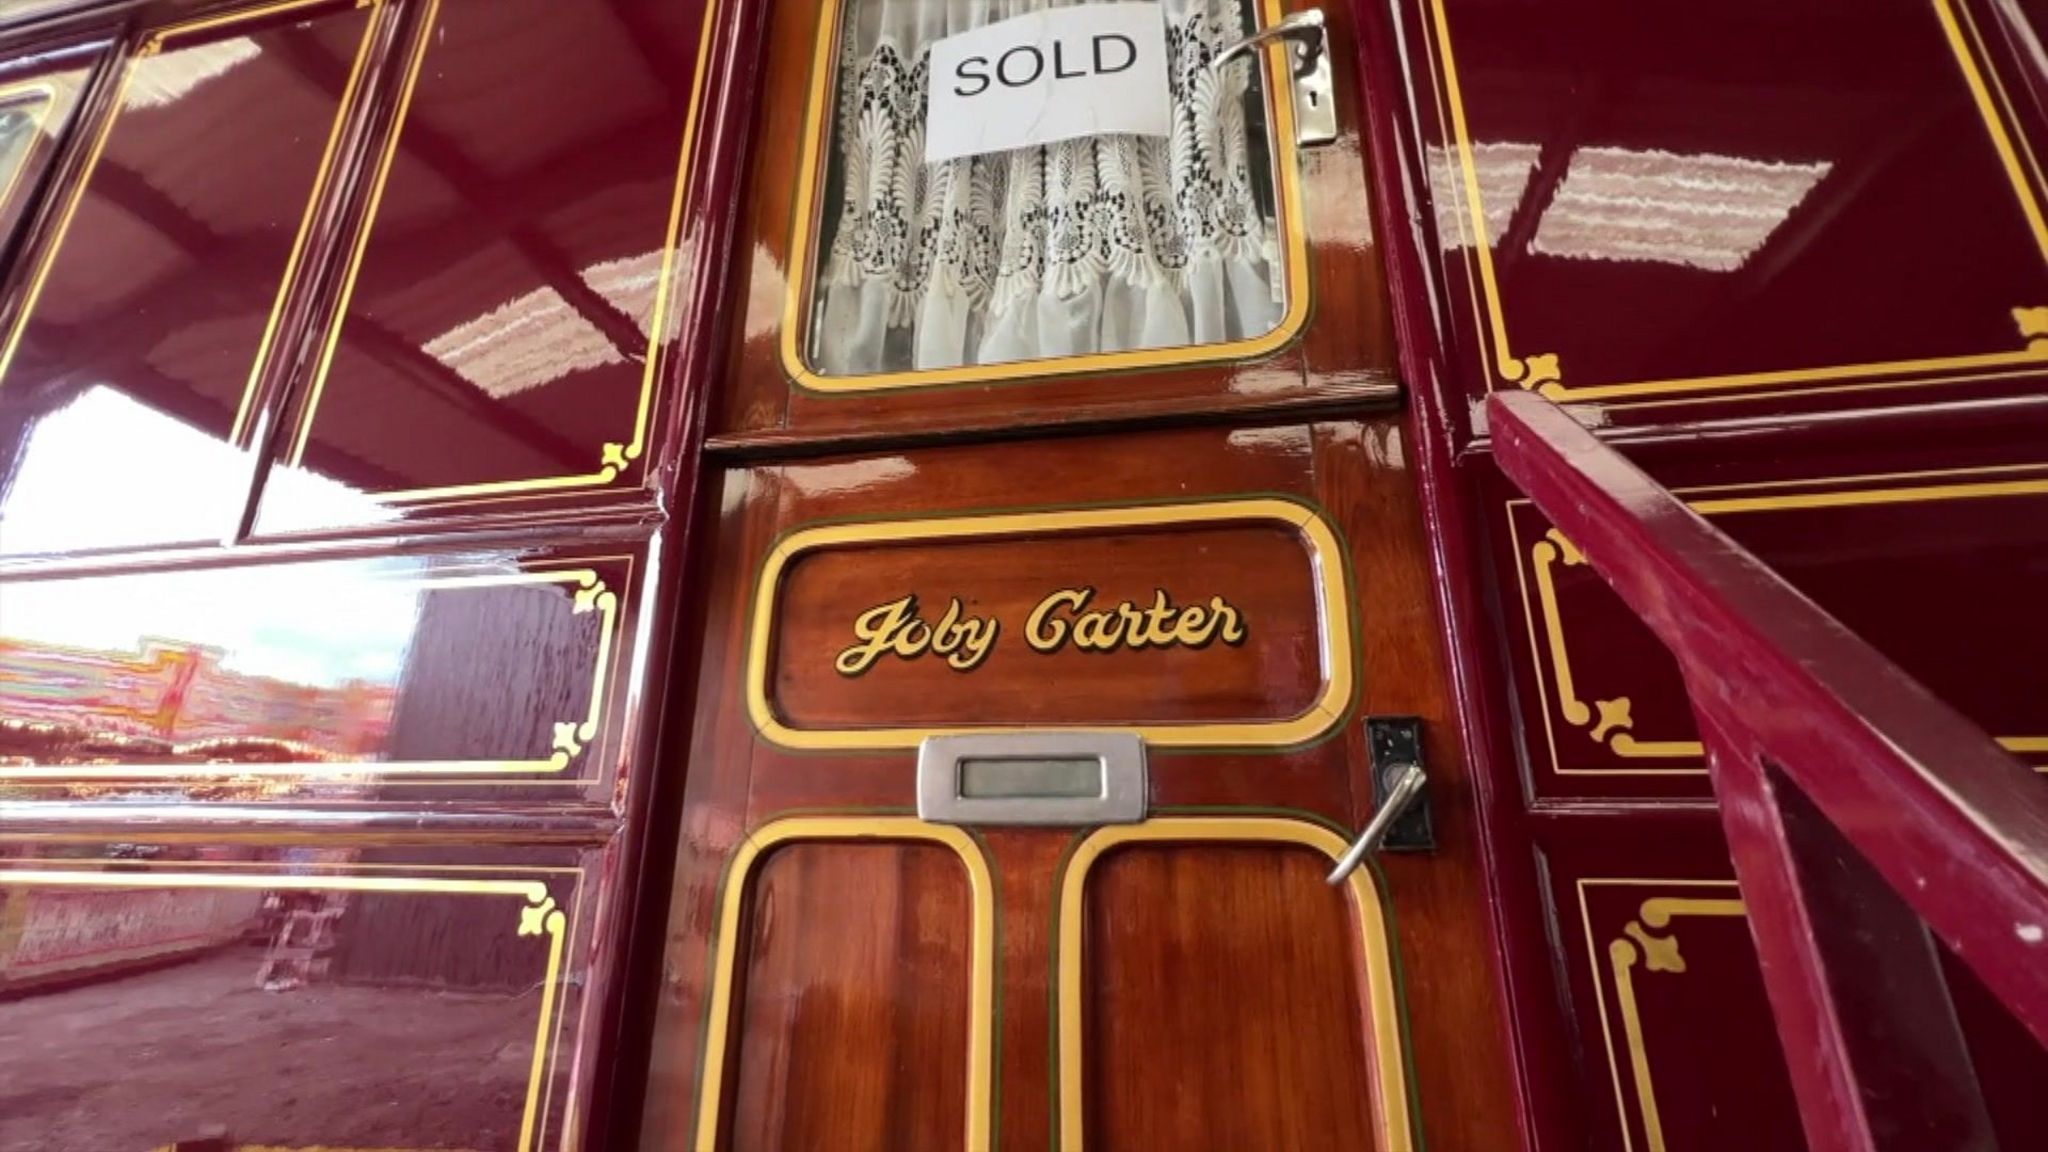 The door of a red painted caravan bearing the name Joby Carter and a white sold sign